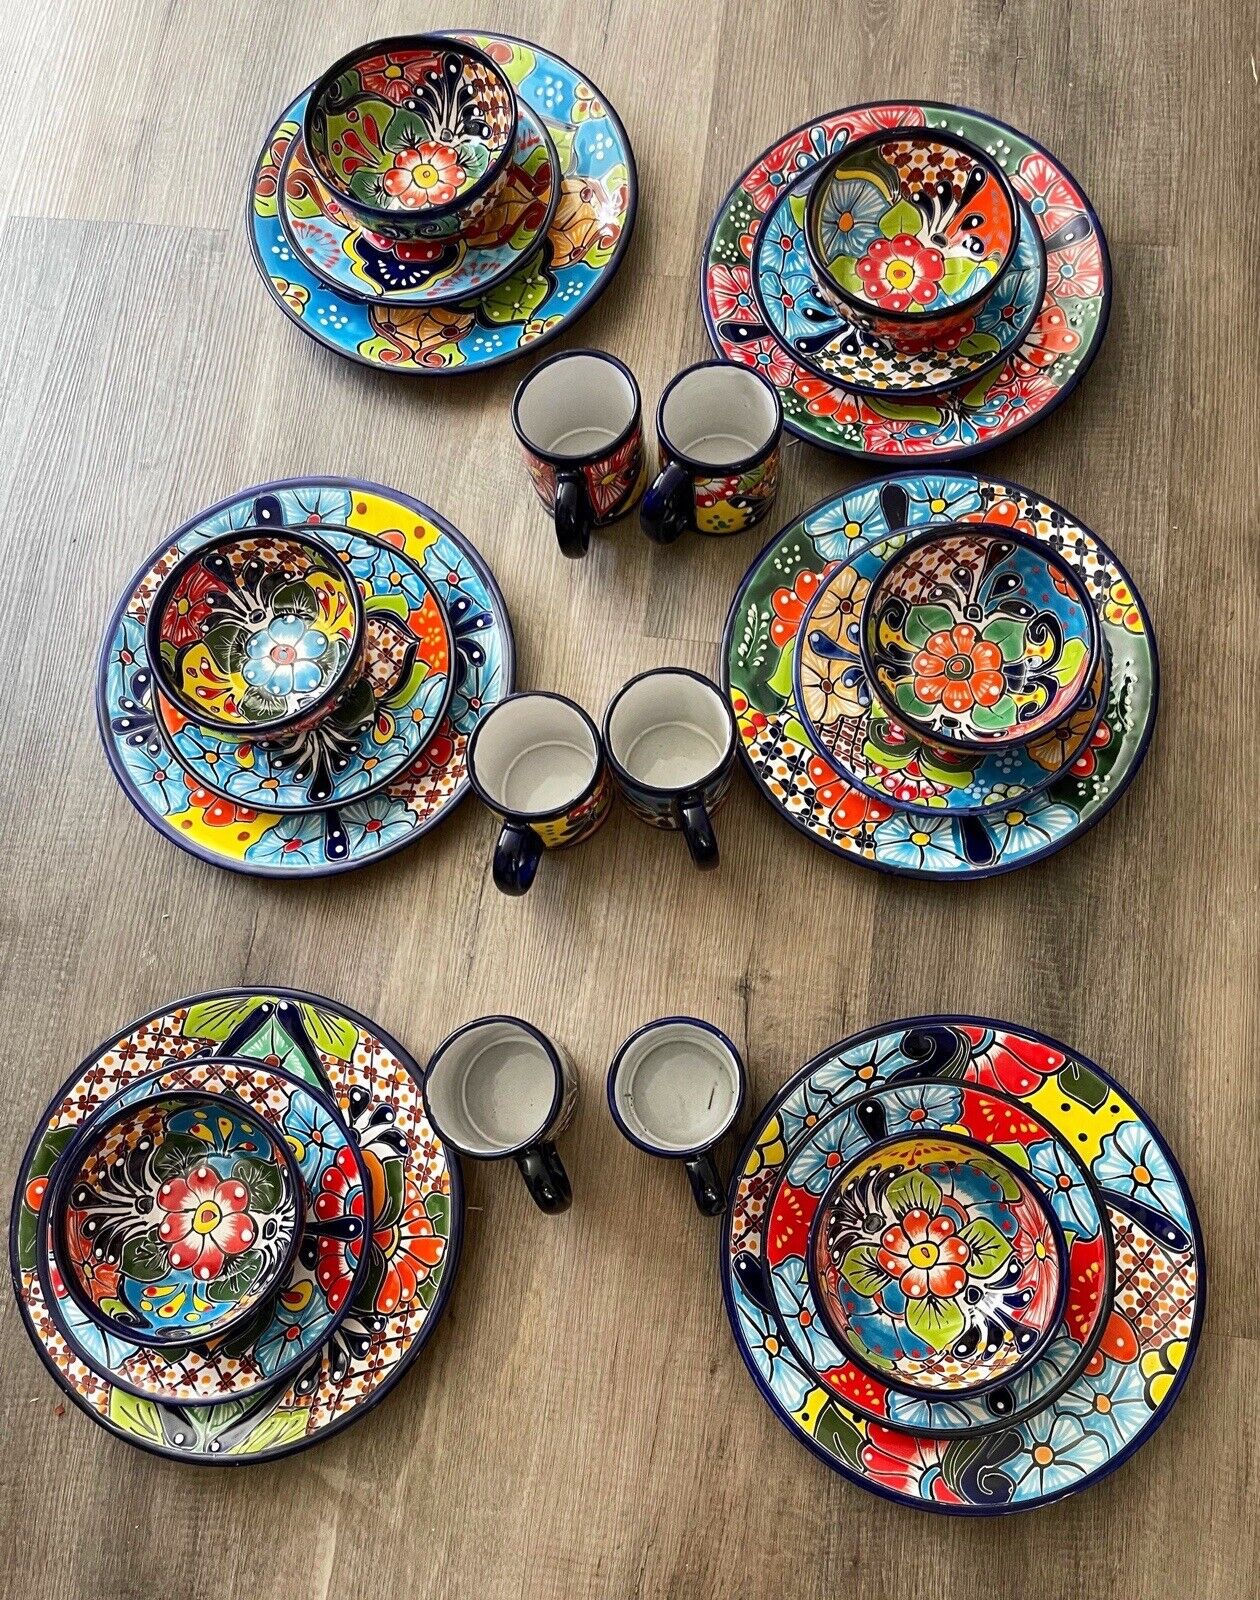 26 Piece Talavera Dinnerware Set Seat 6 Vibrant Dishes with Floral leadfree